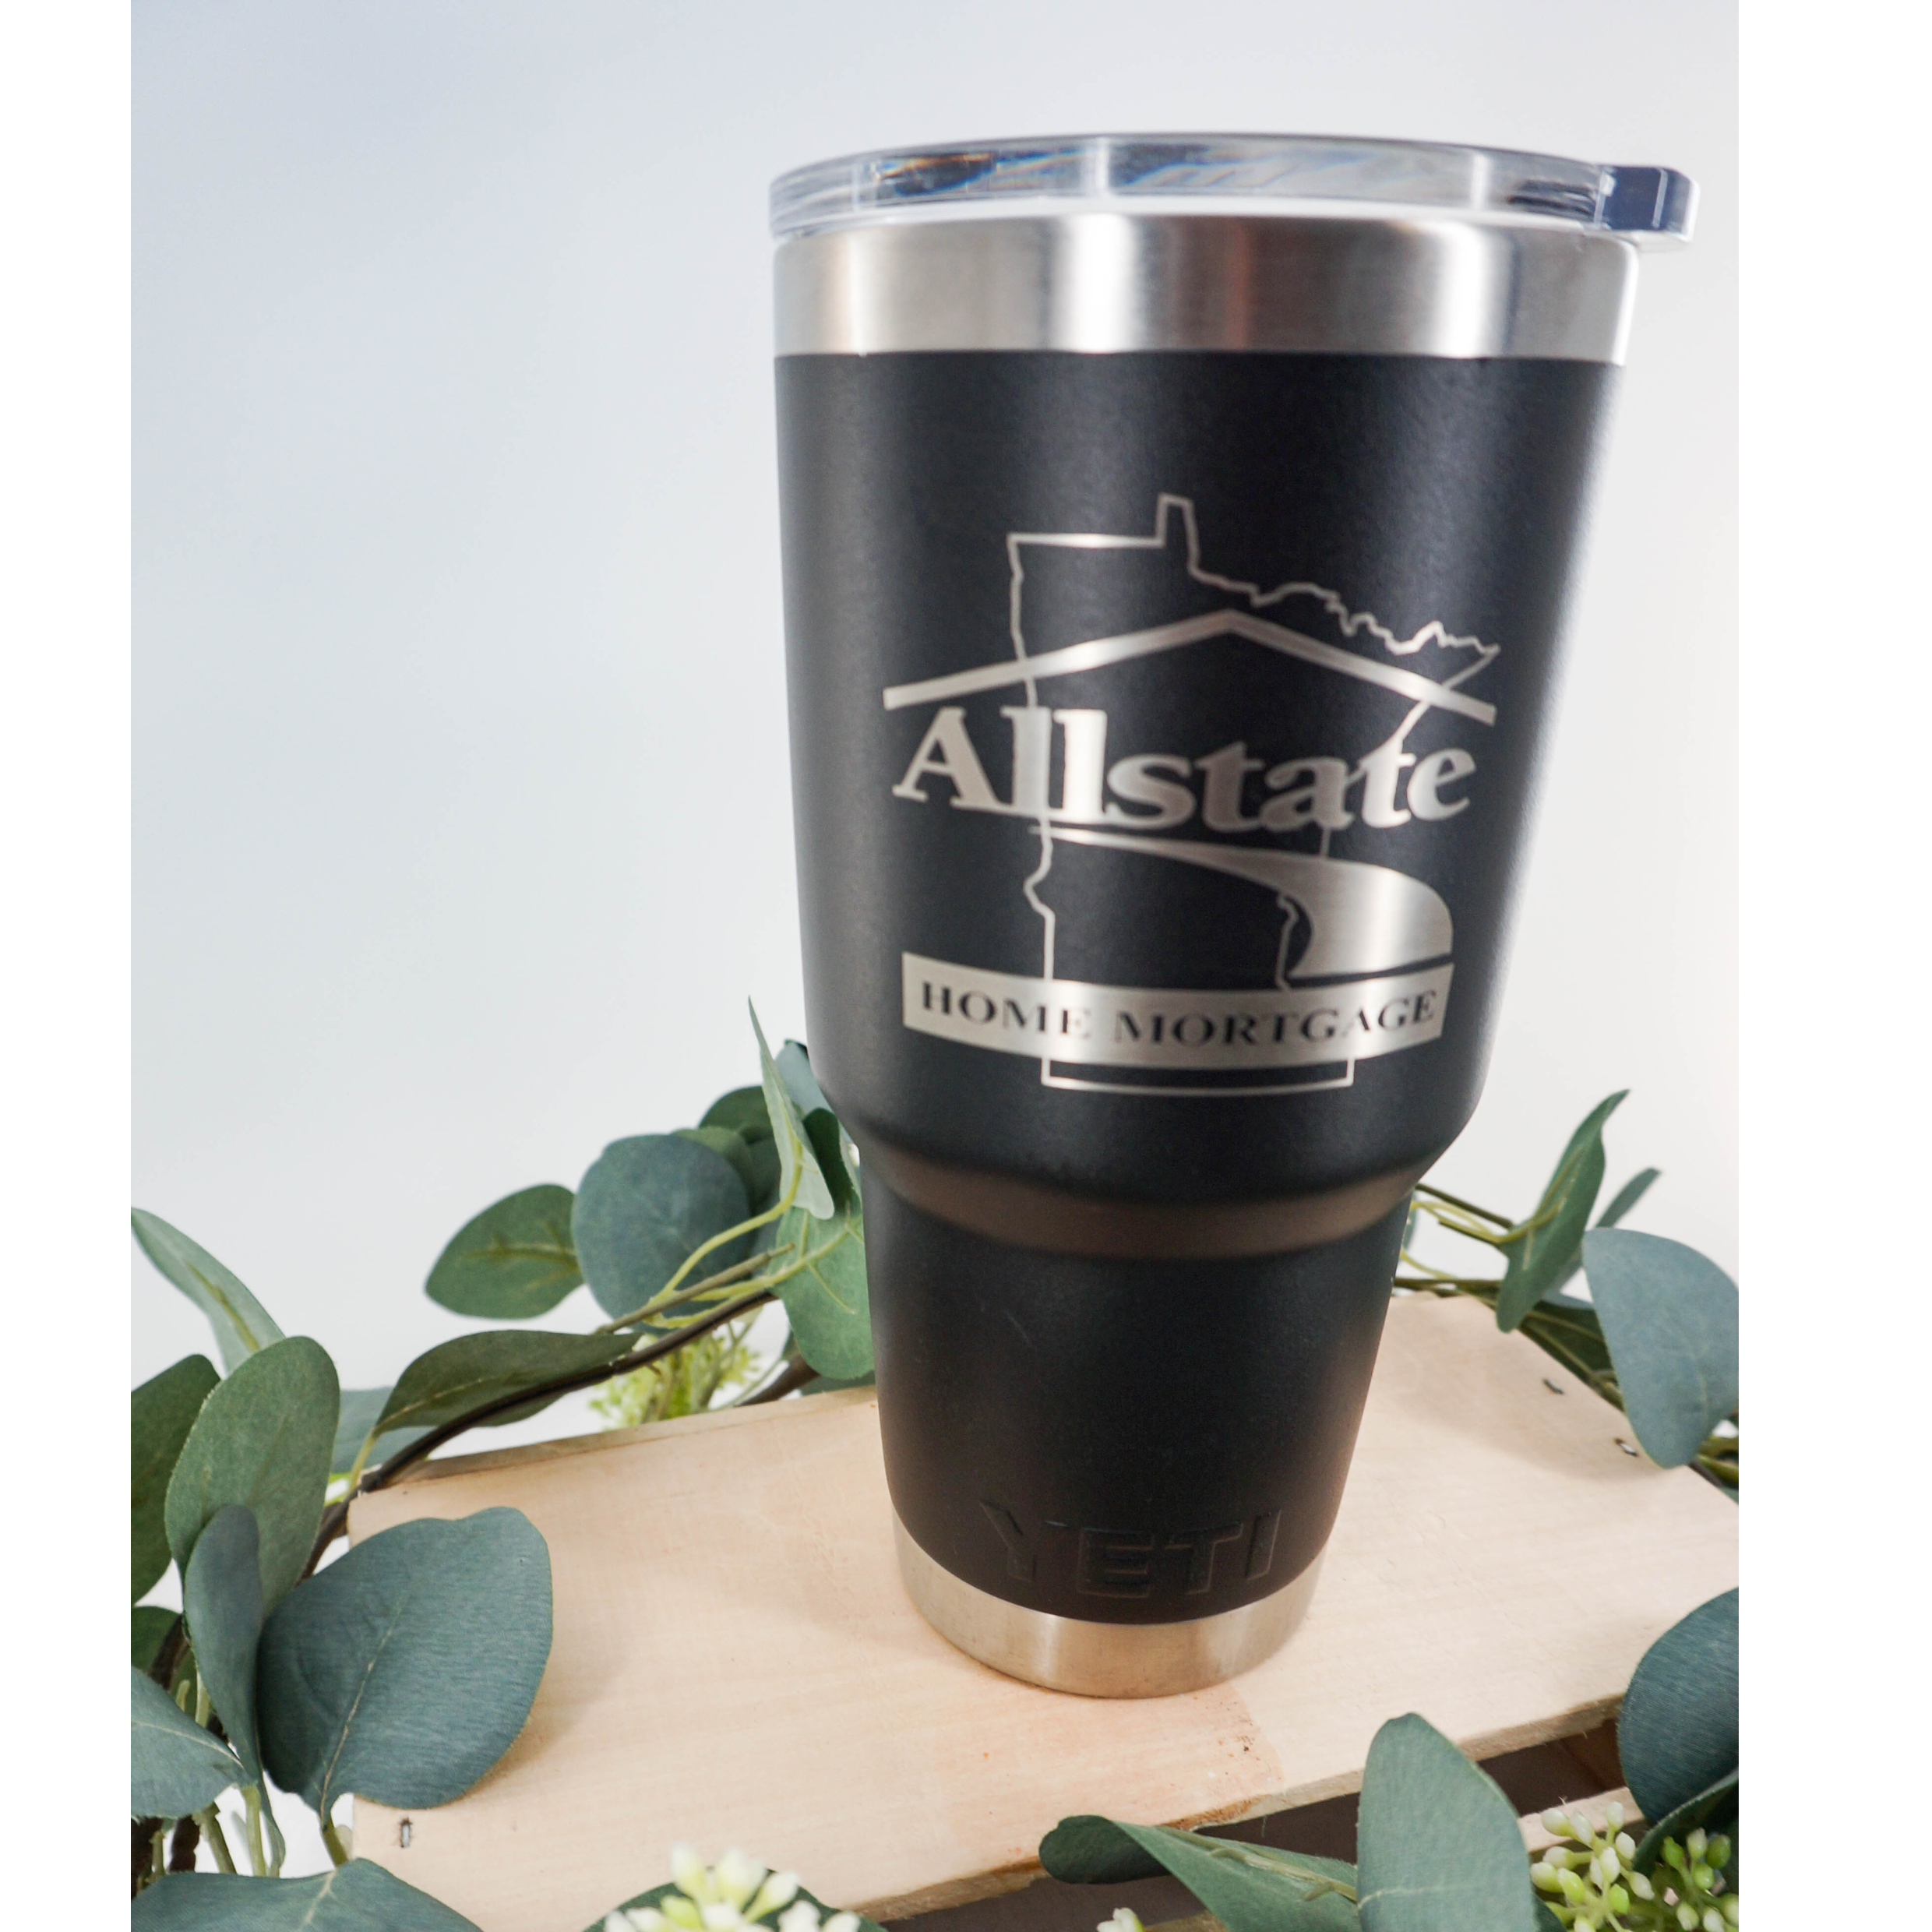 Rambler 26 oz Stackable Cup - Design: Custom - Everything Etched